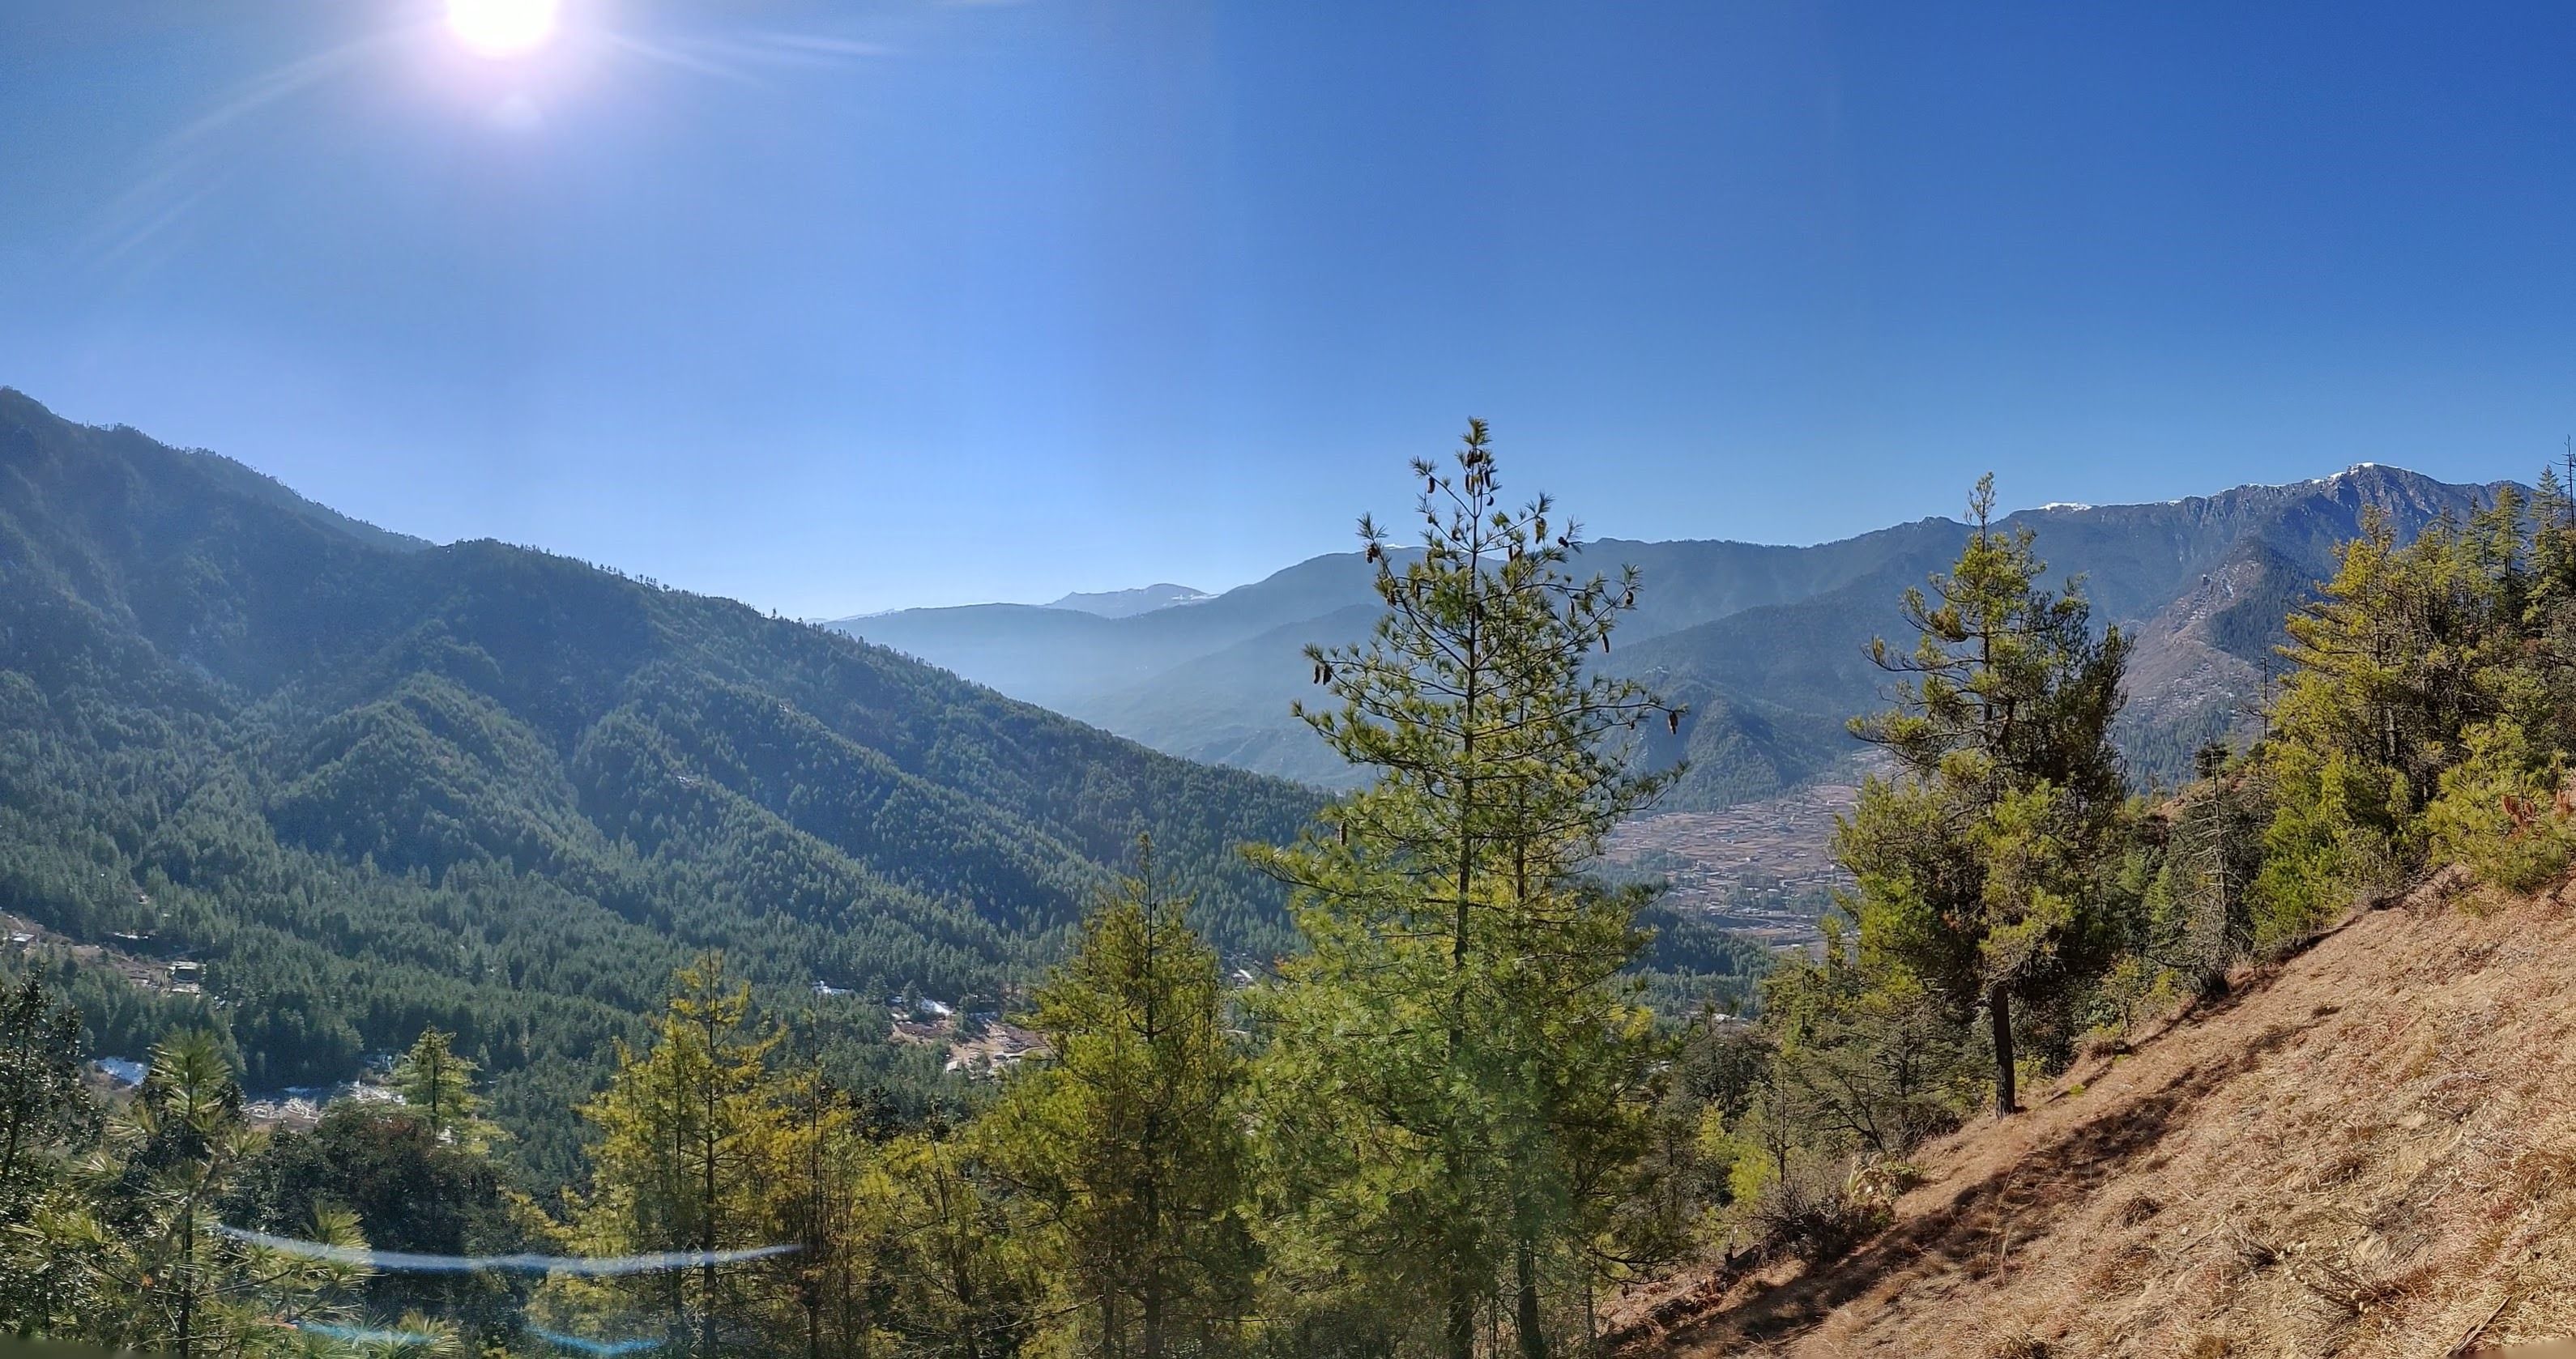 Panaromic View from the Taktsang Hill